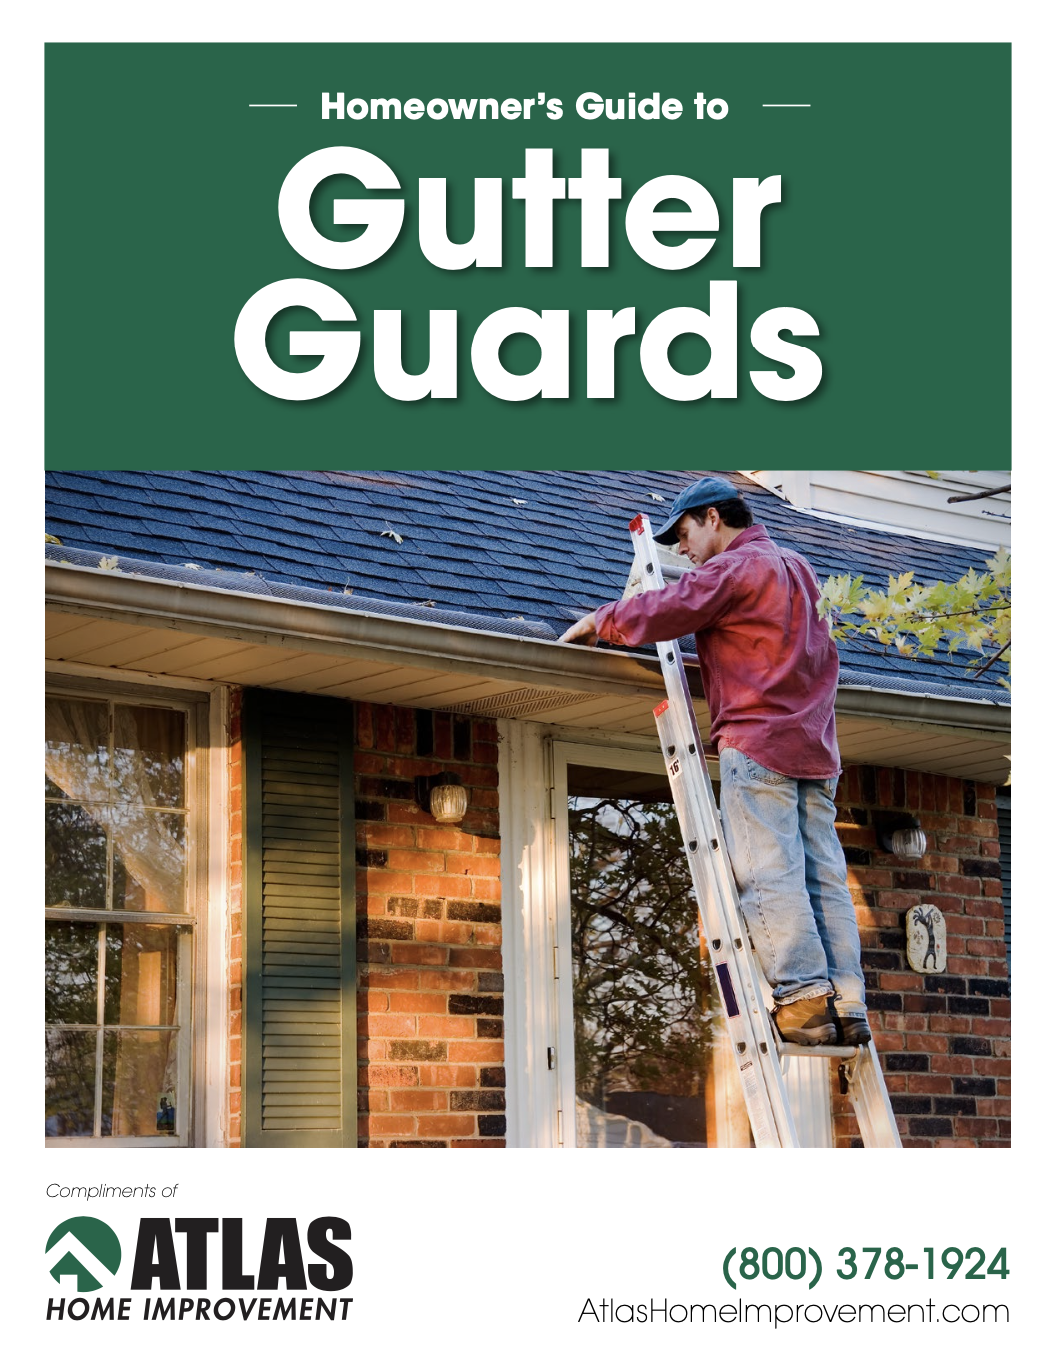 Homeowner's Guide to Gutter Guards